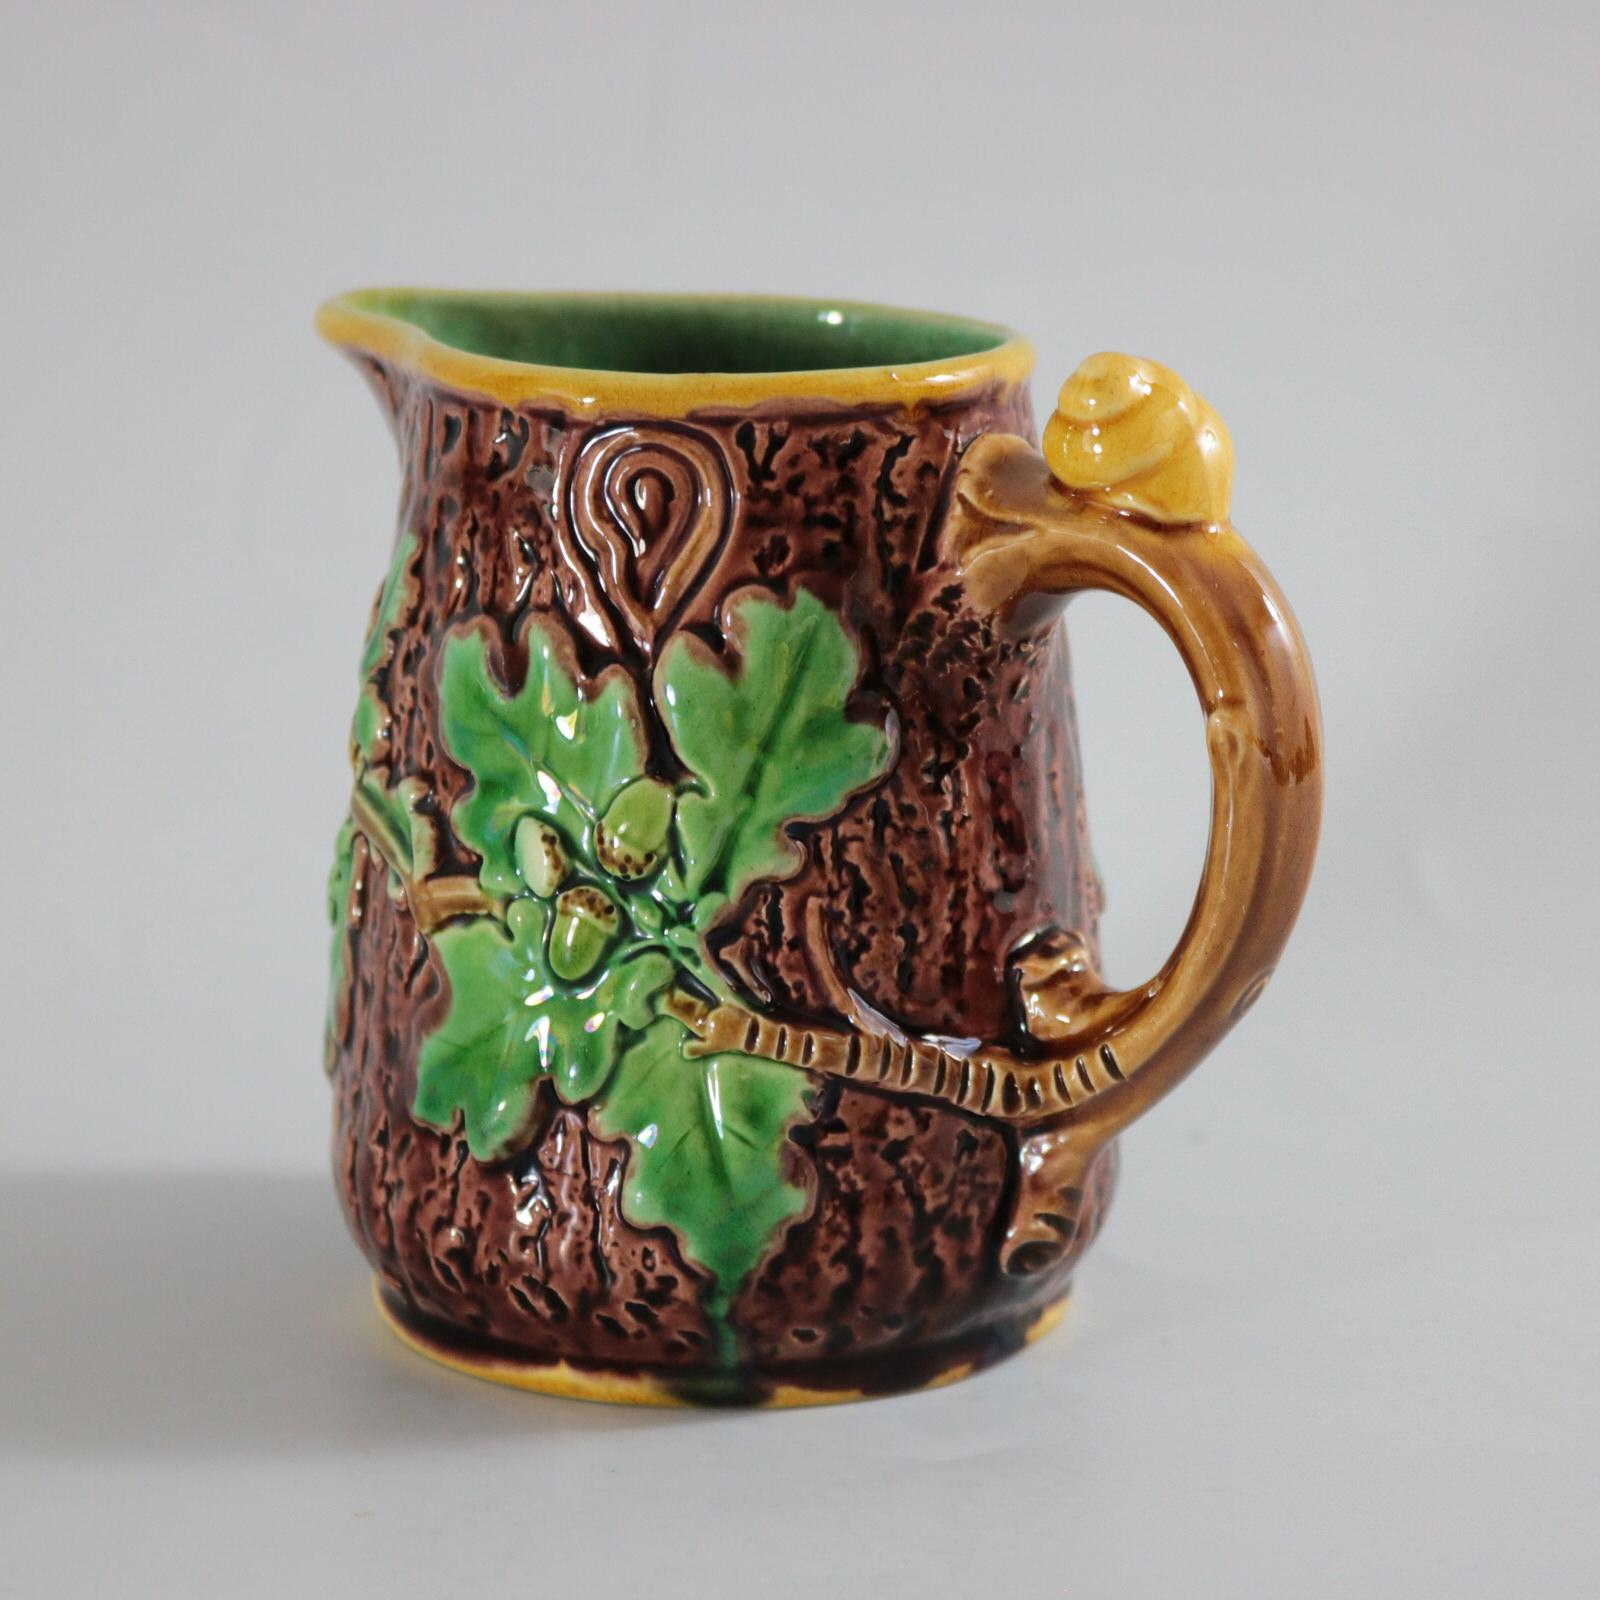 Minton Majolica jug/pitcher which features oak leaves and acorns to the sides and a snail to the handle. Colouration: brown, green, yellow, are predominant. The piece bears maker's marks for the Minton pottery. Bears a pattern number, '553'. Marks